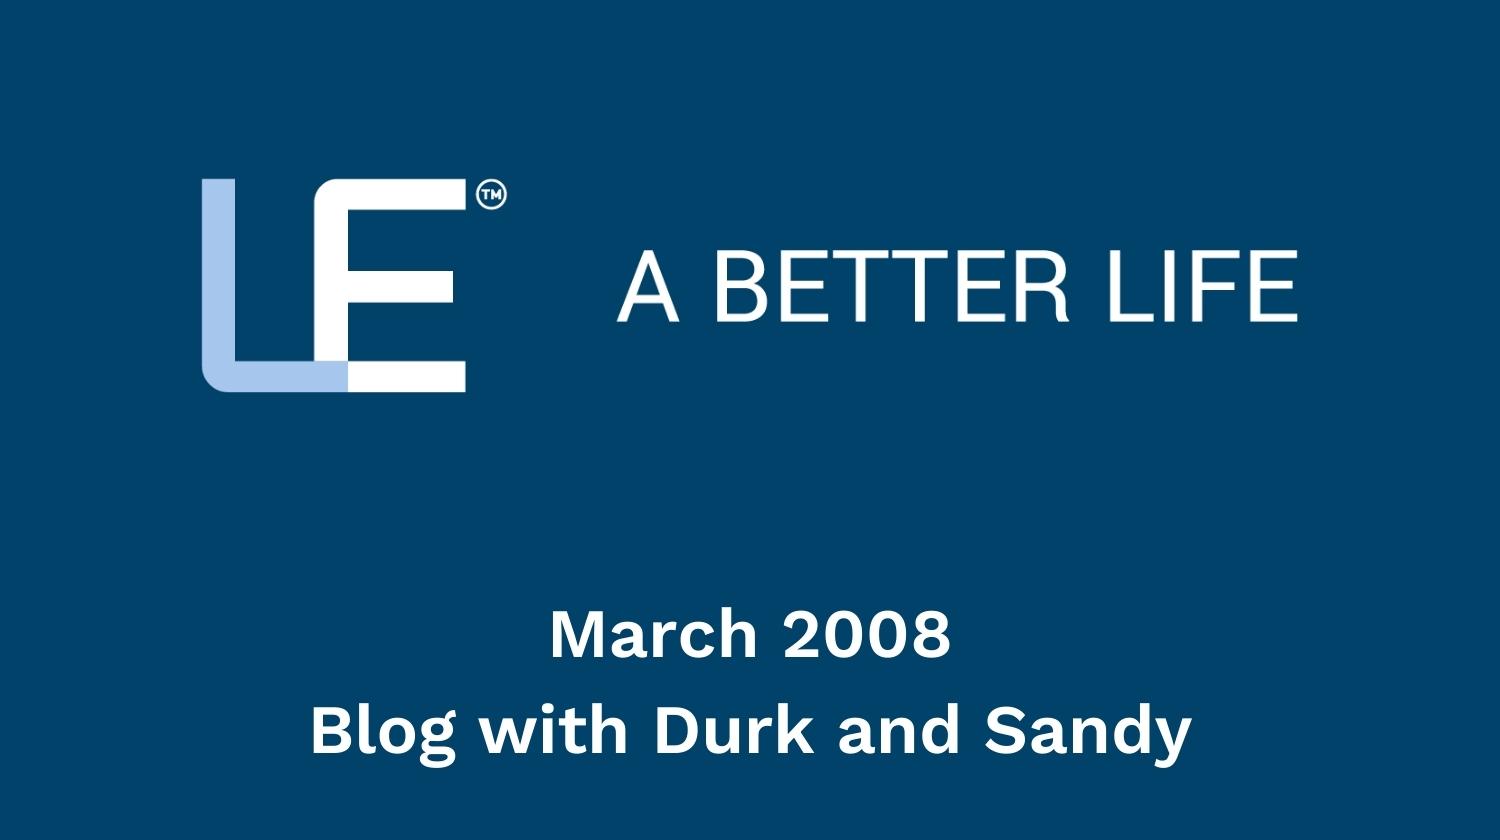 March 2008 Blog with Durk and Sandy